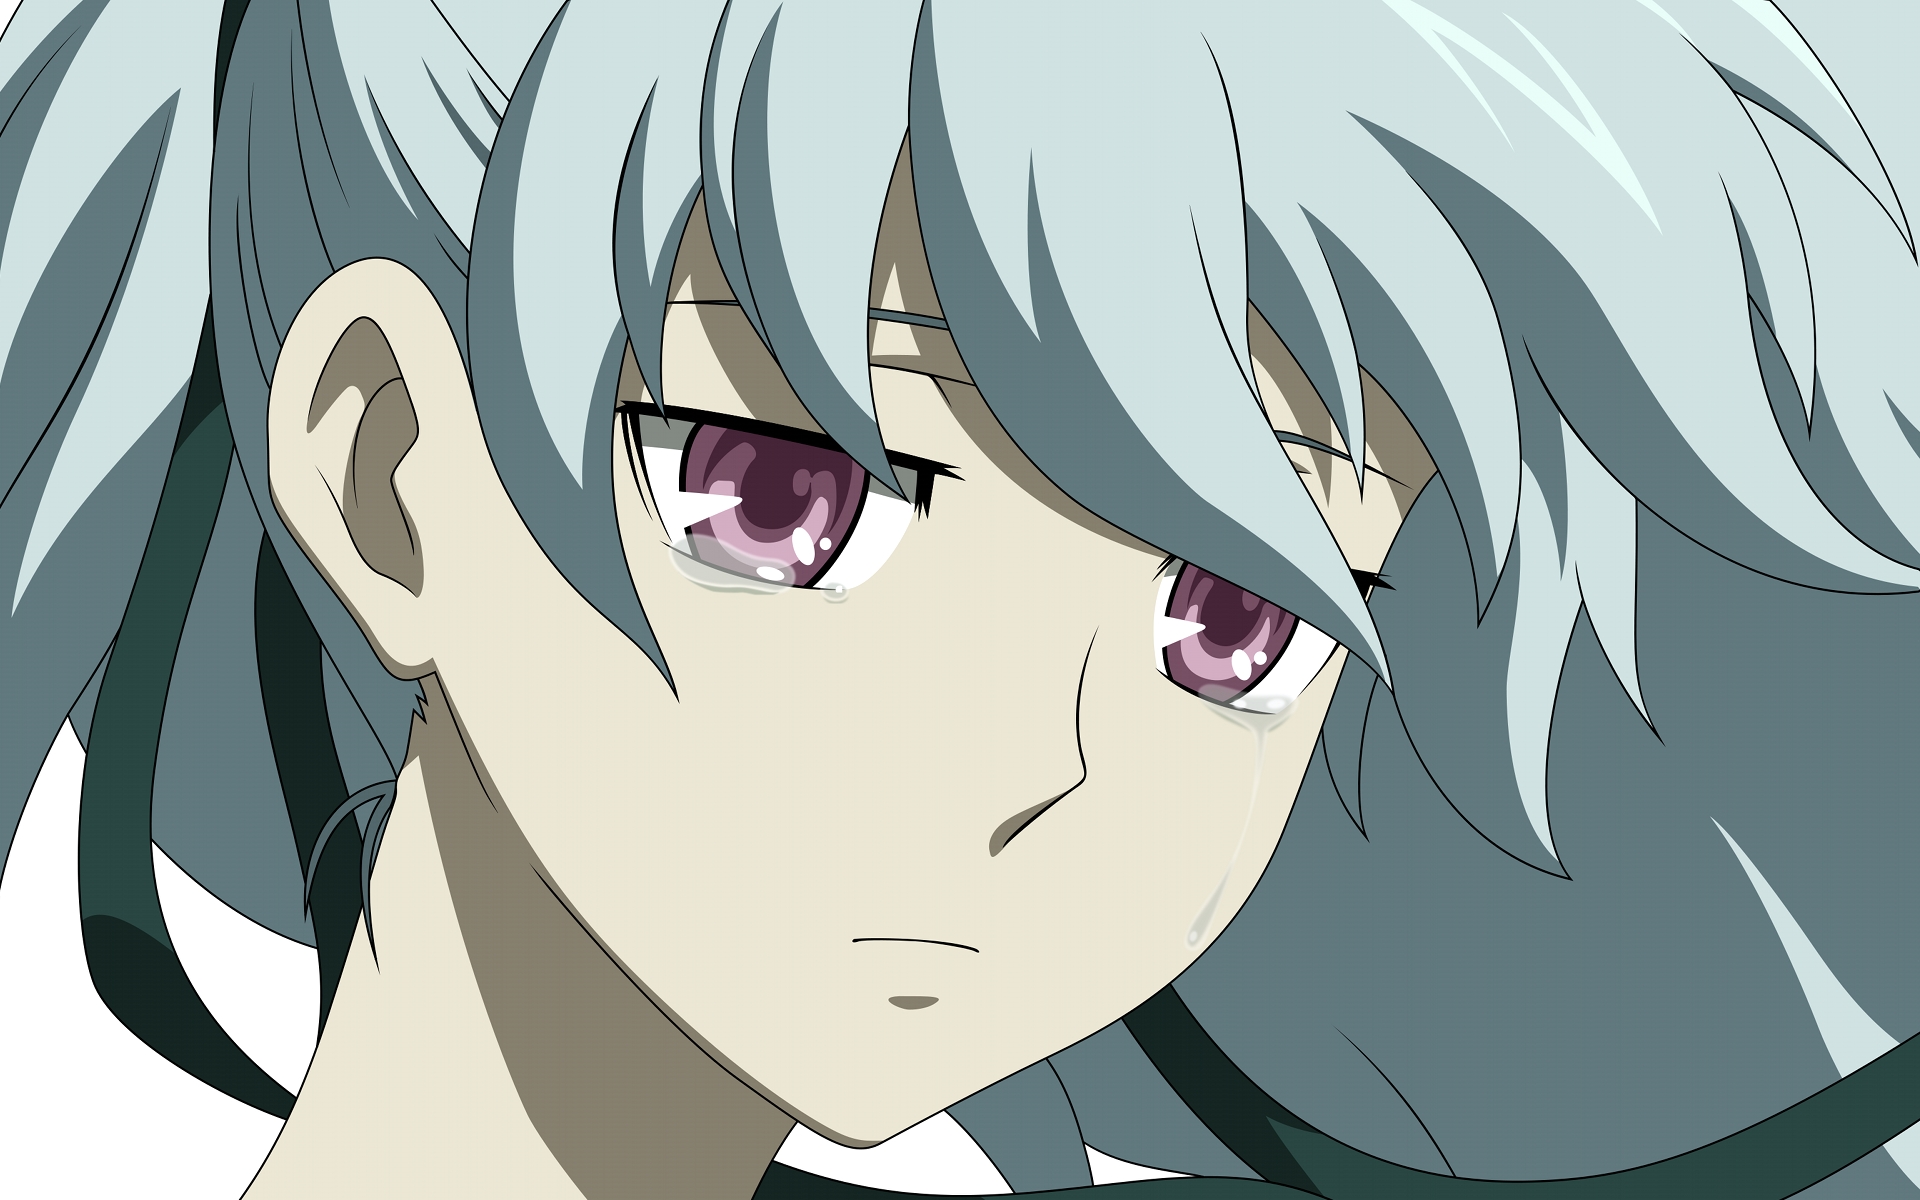 Yin from Darker Than Black, a captivating anime character gracing your desktop wallpaper.